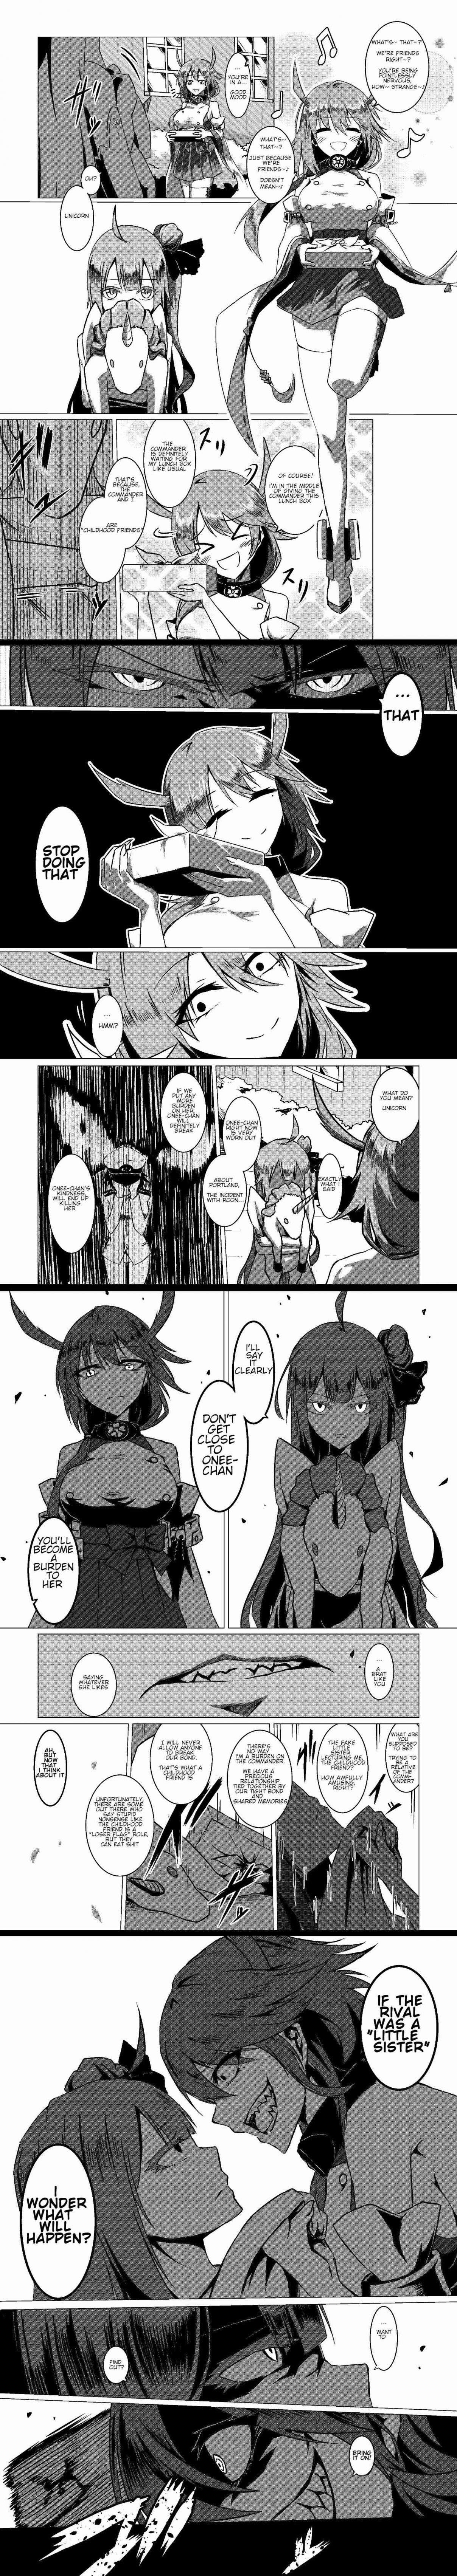 Azur Lane: A Journal Ch. 15 "You're just a minor character"